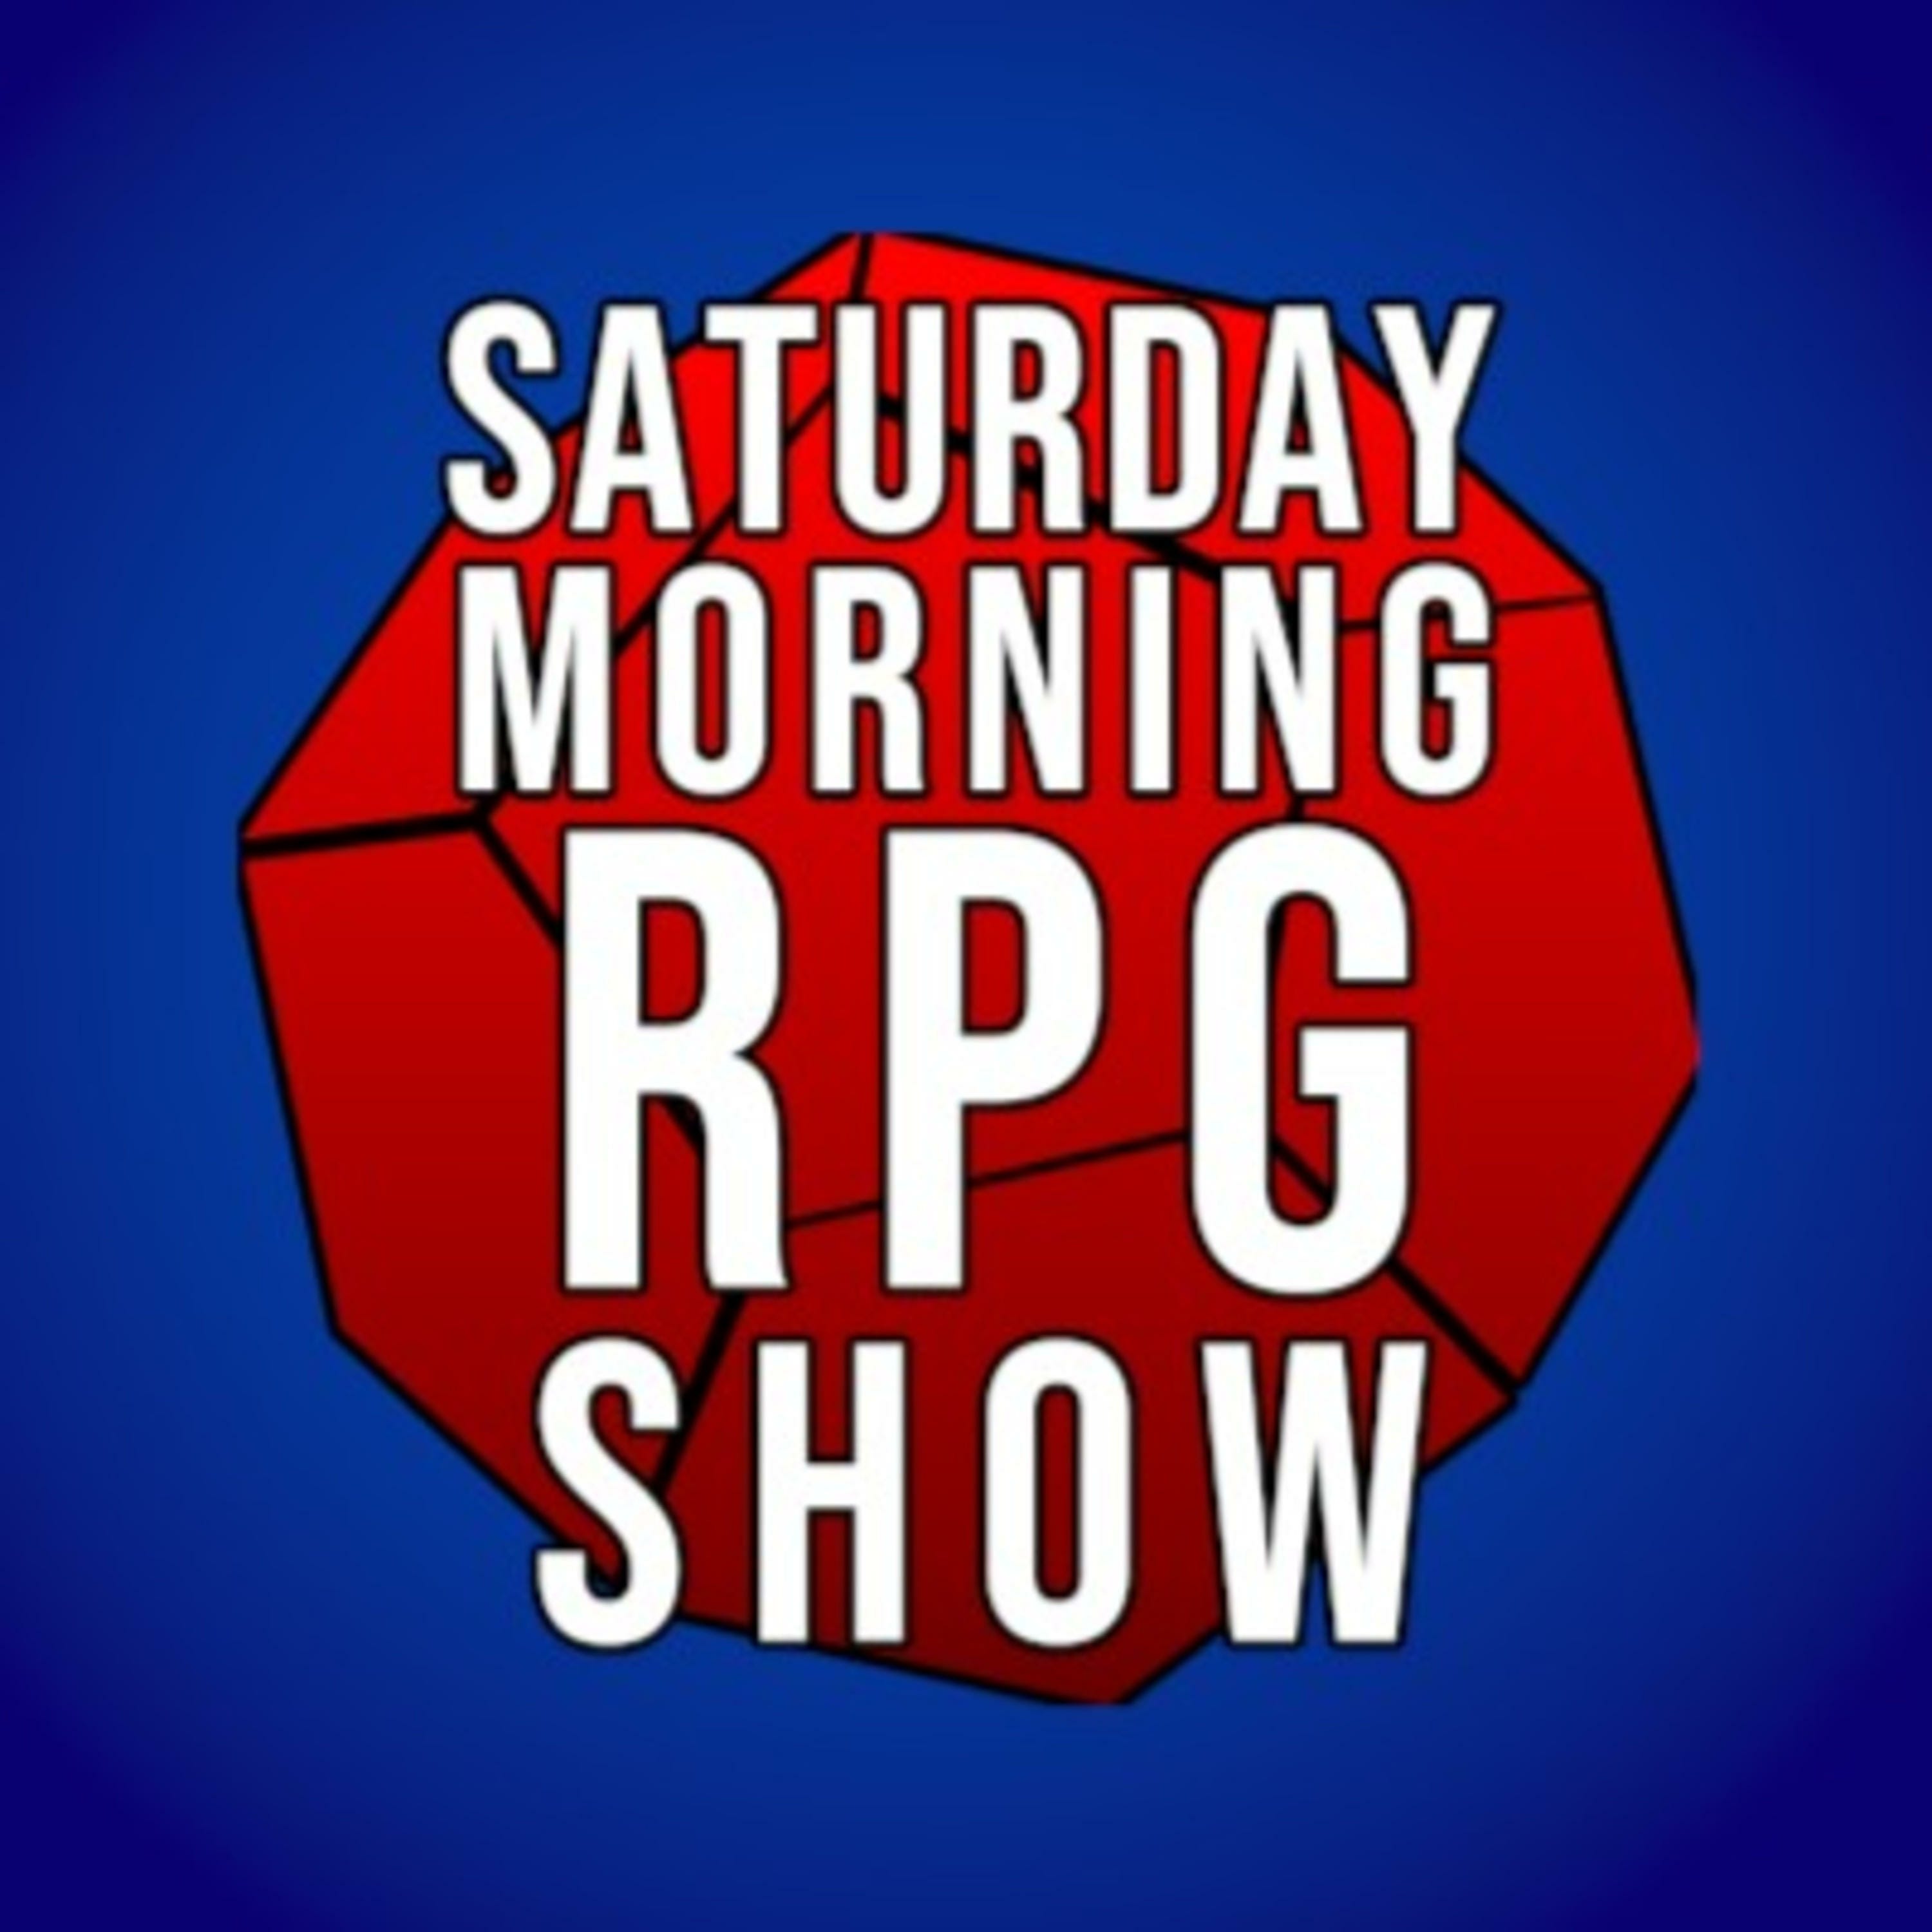 Ep 111 - D&D Errata and Safe Gaming!